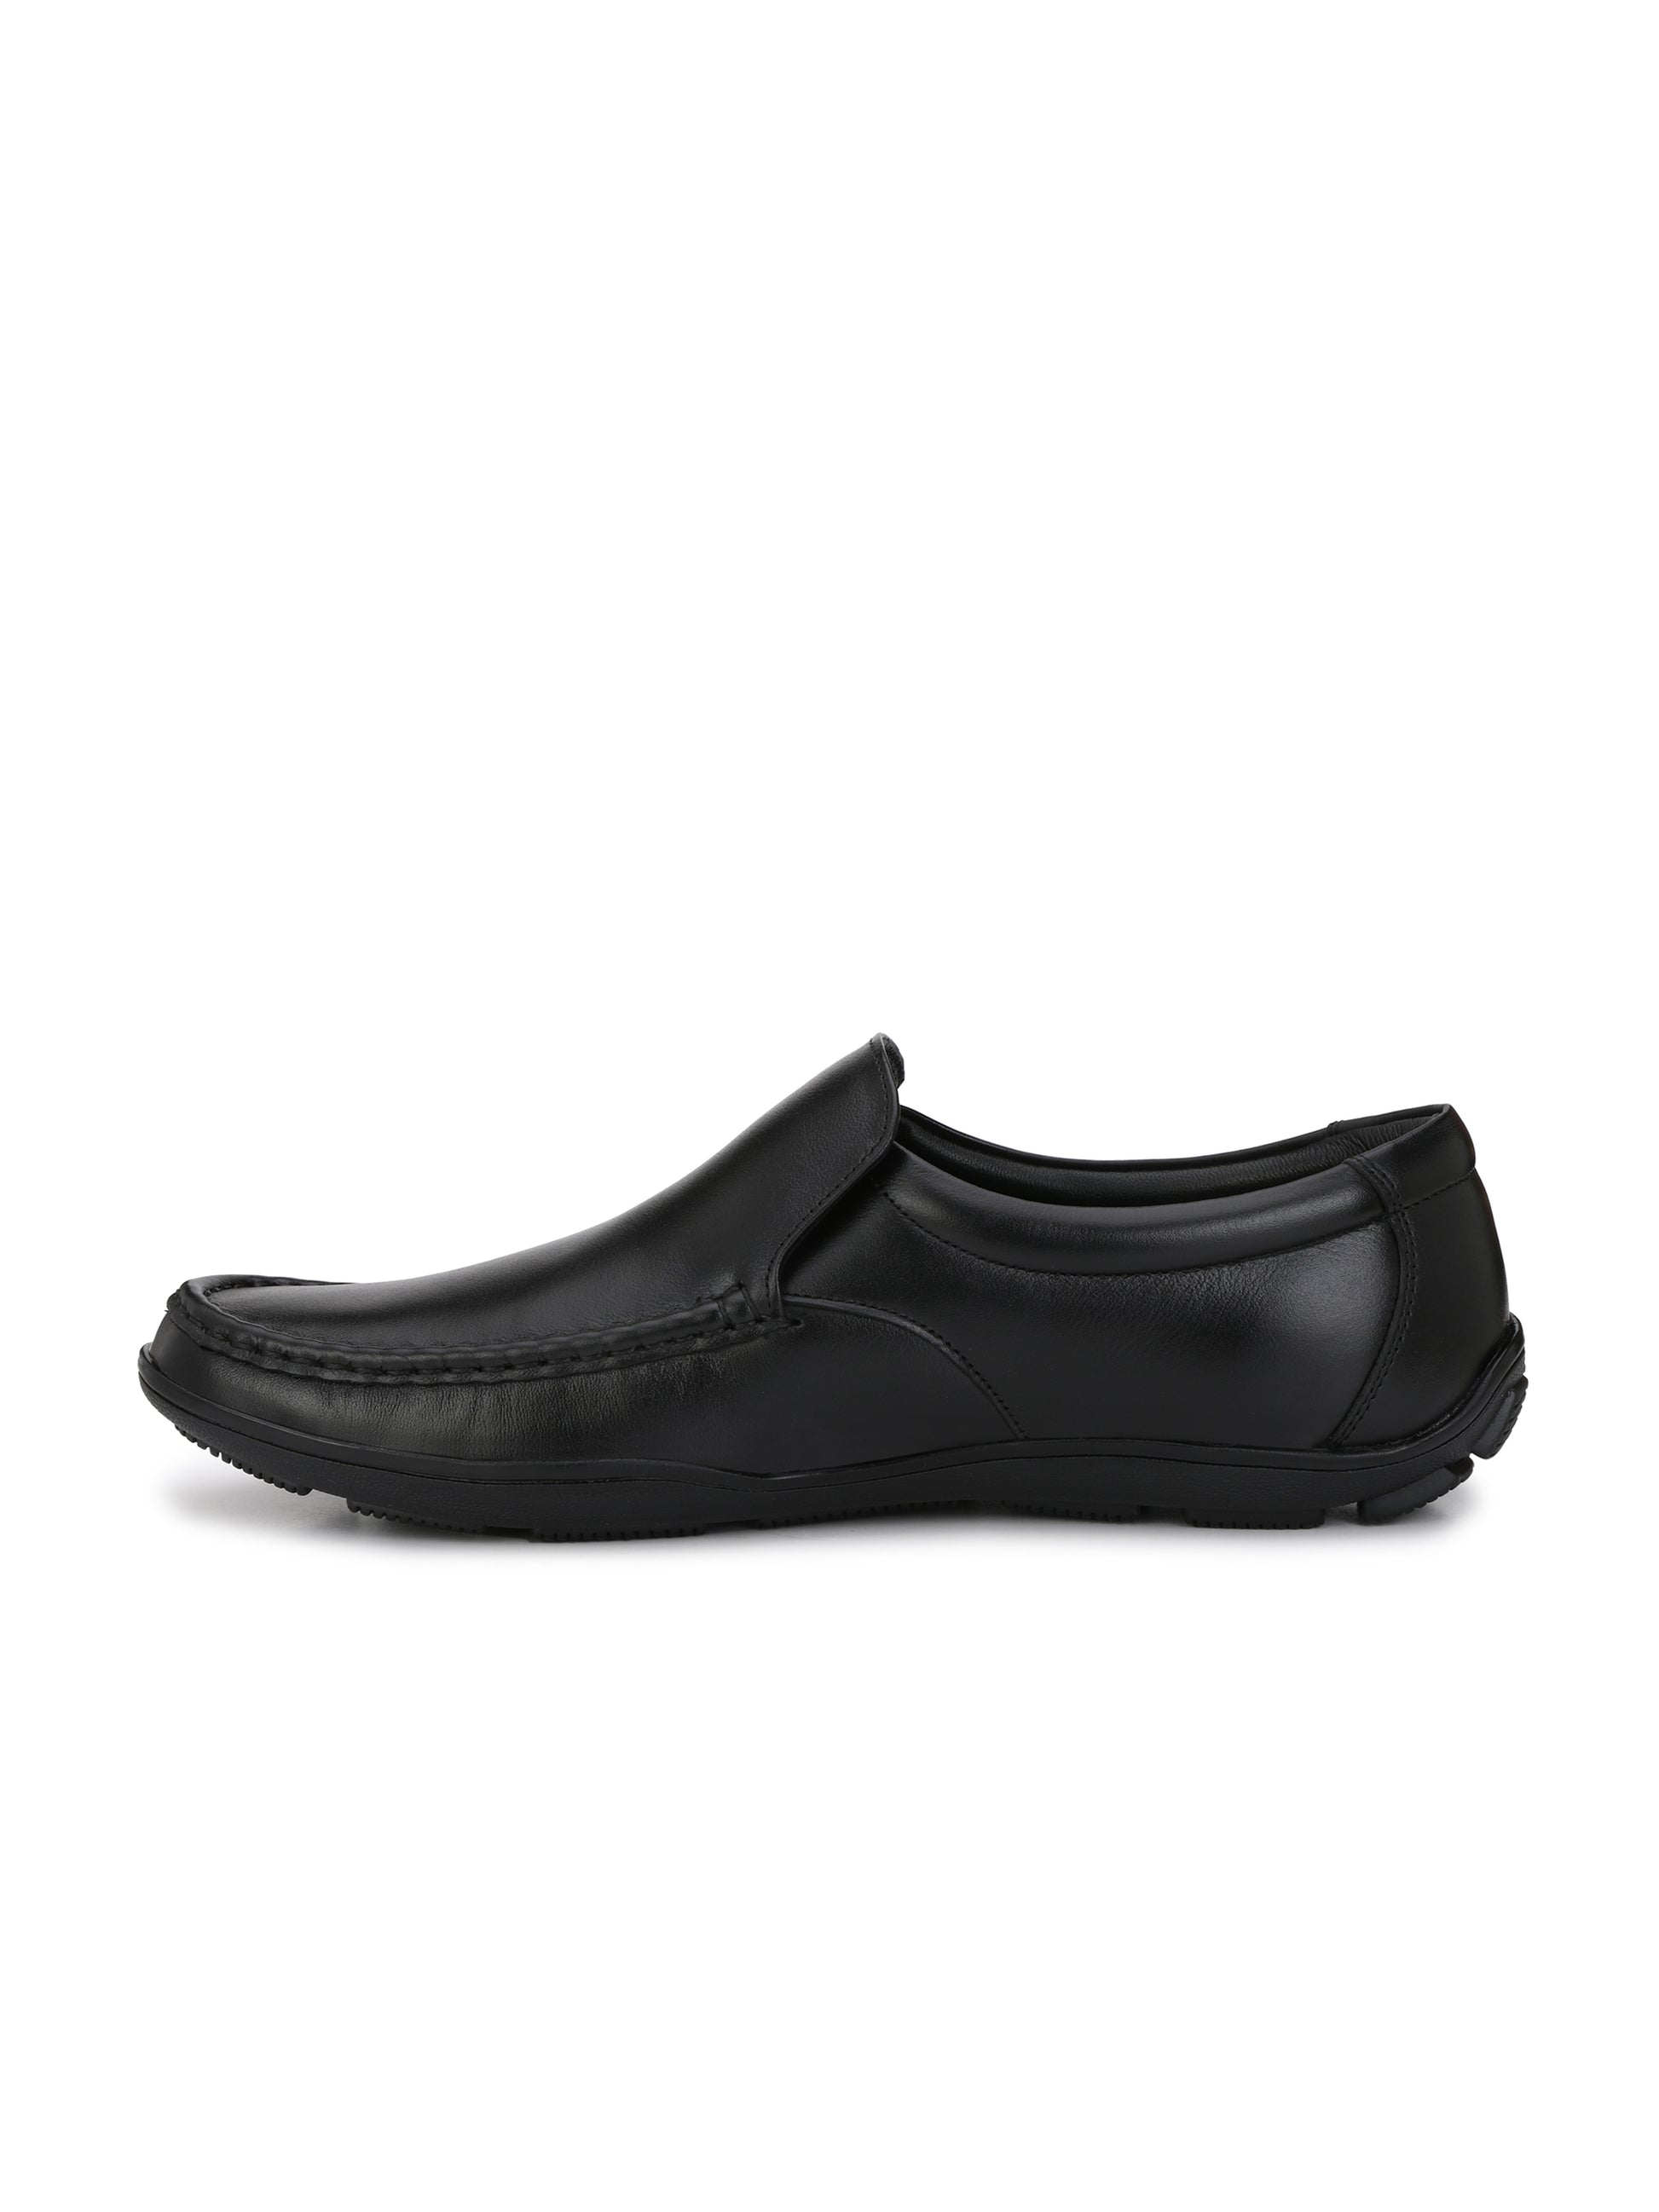 Egoss Leather Loafers Shoes For Men – Egoss Shoes